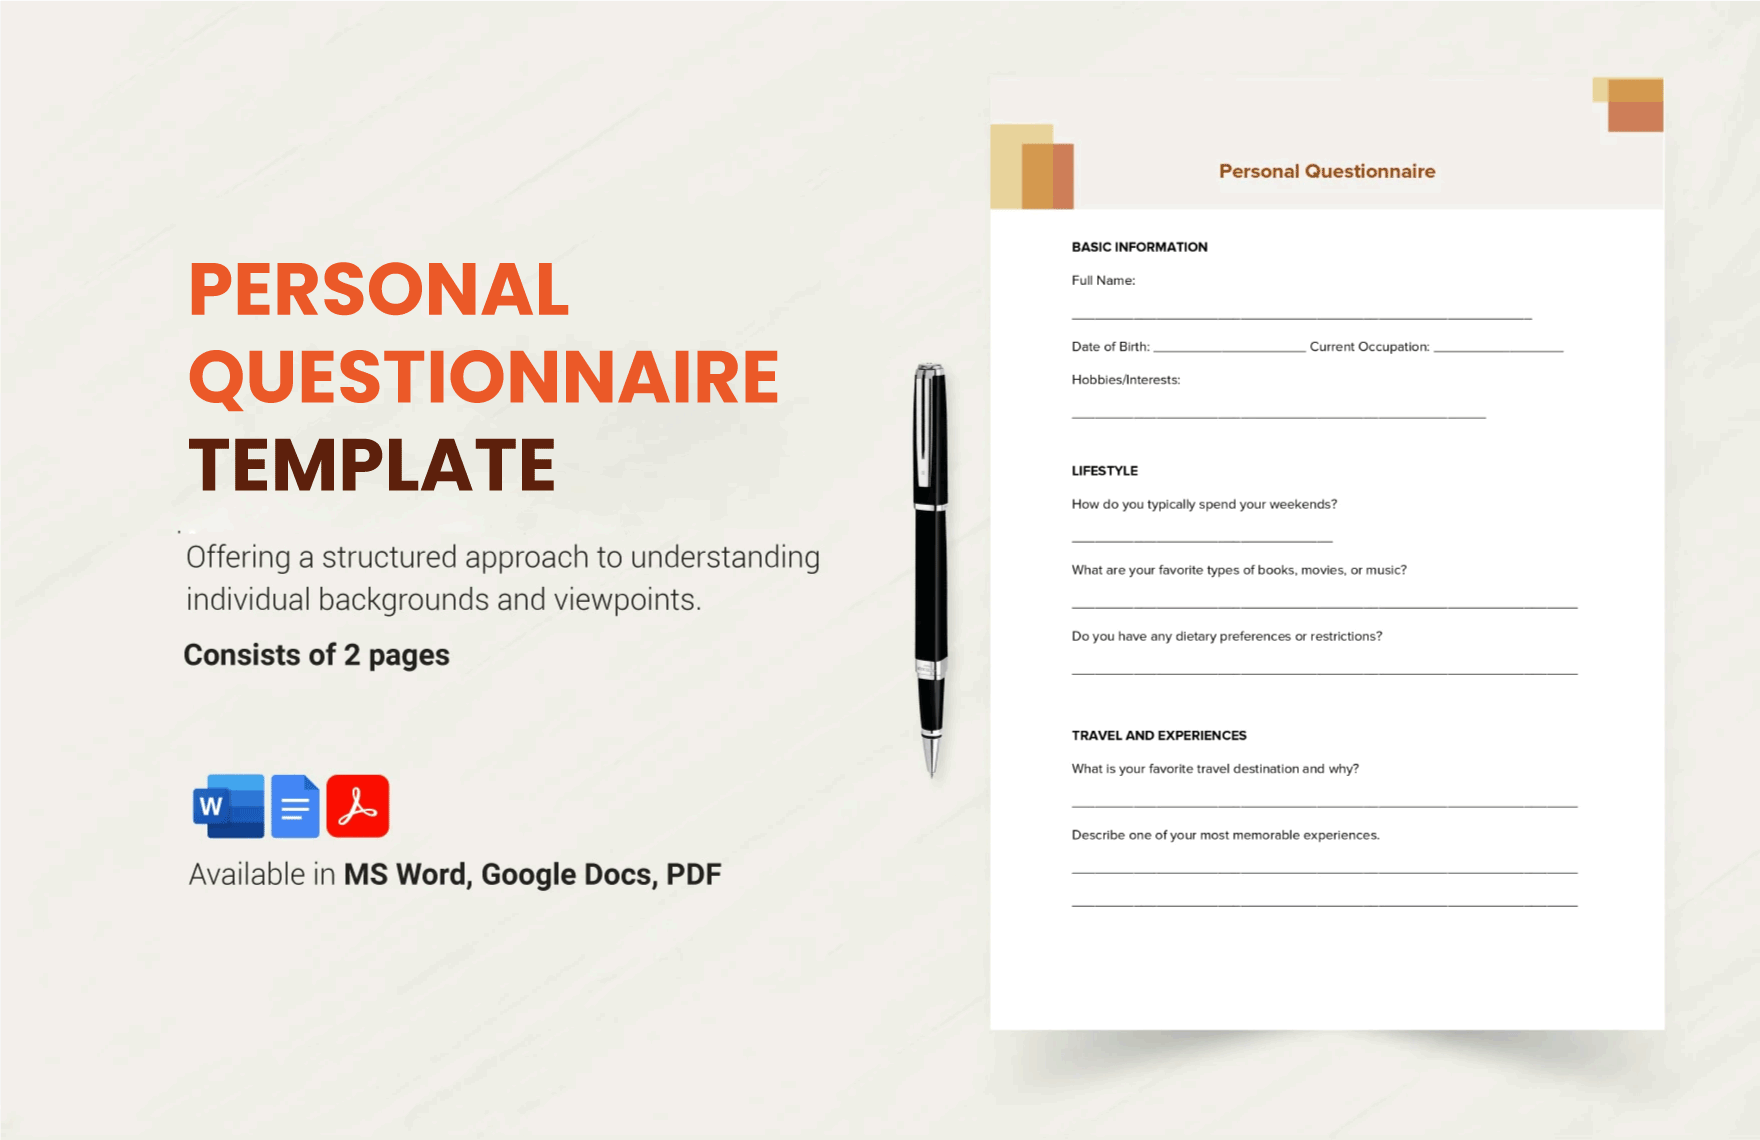 Personal Questionnaire Template